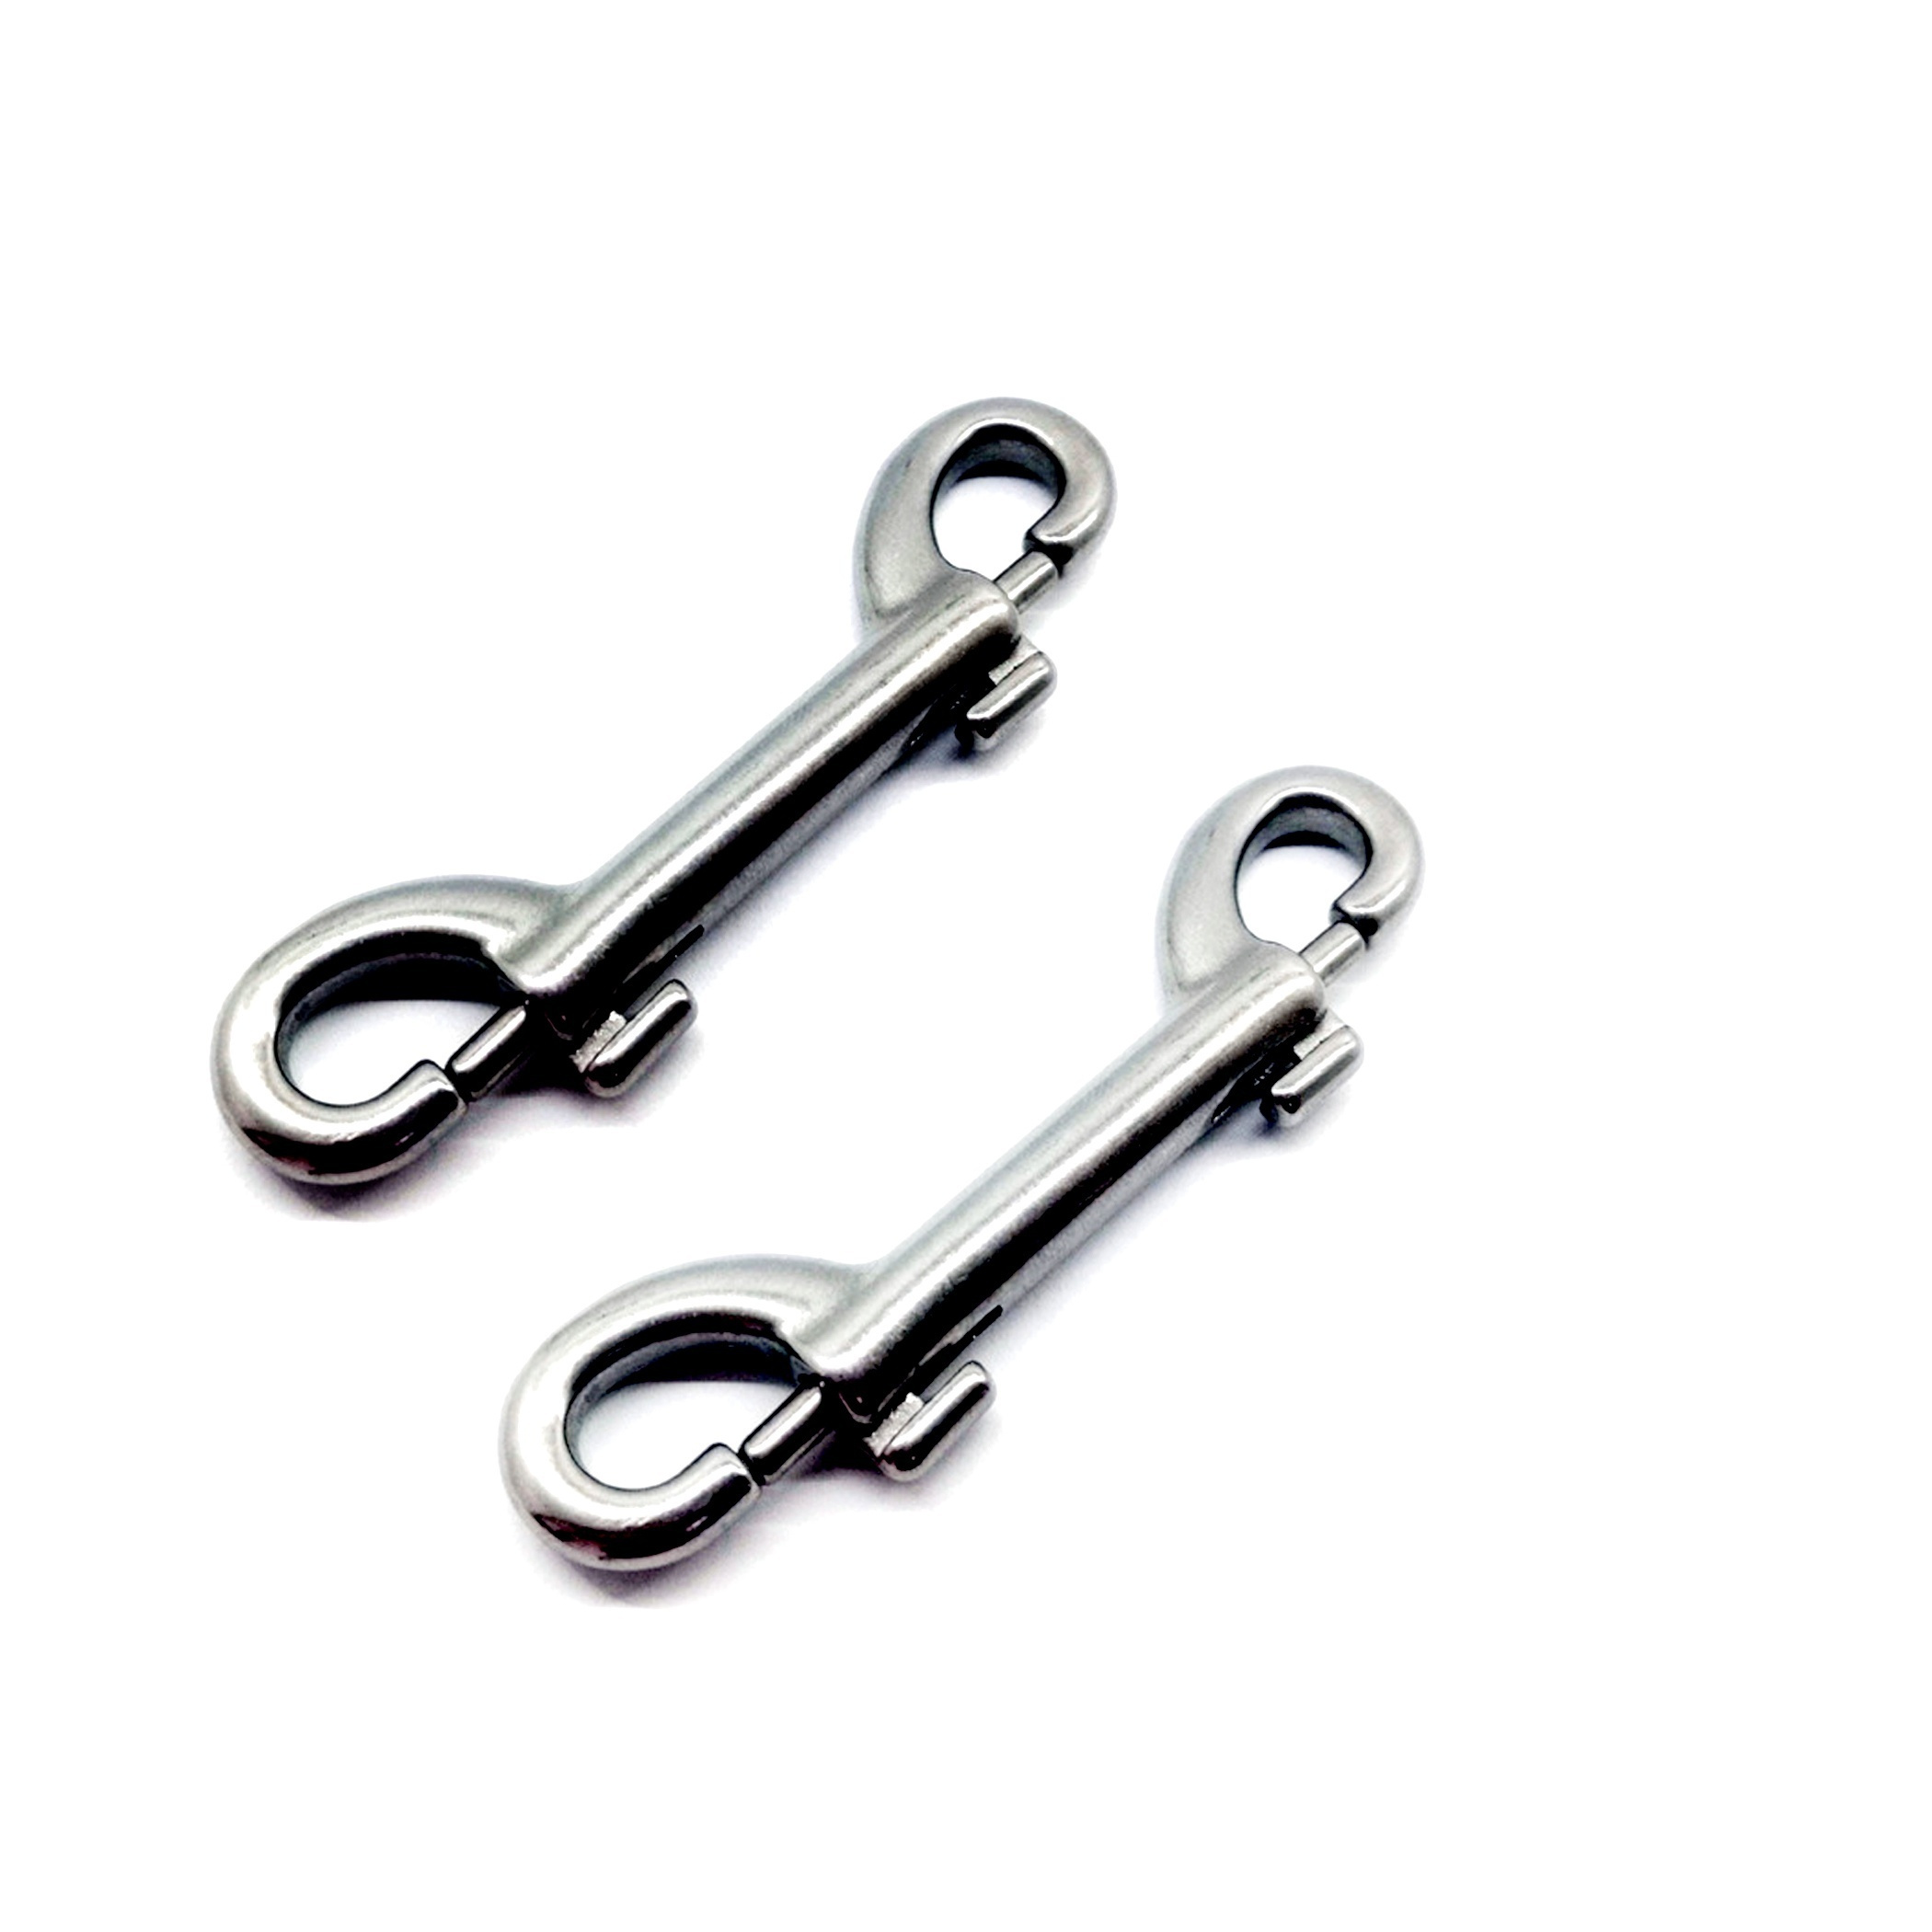 Shop for and Buy Heavy Duty Double End Snap Clip Key Ring Nickel